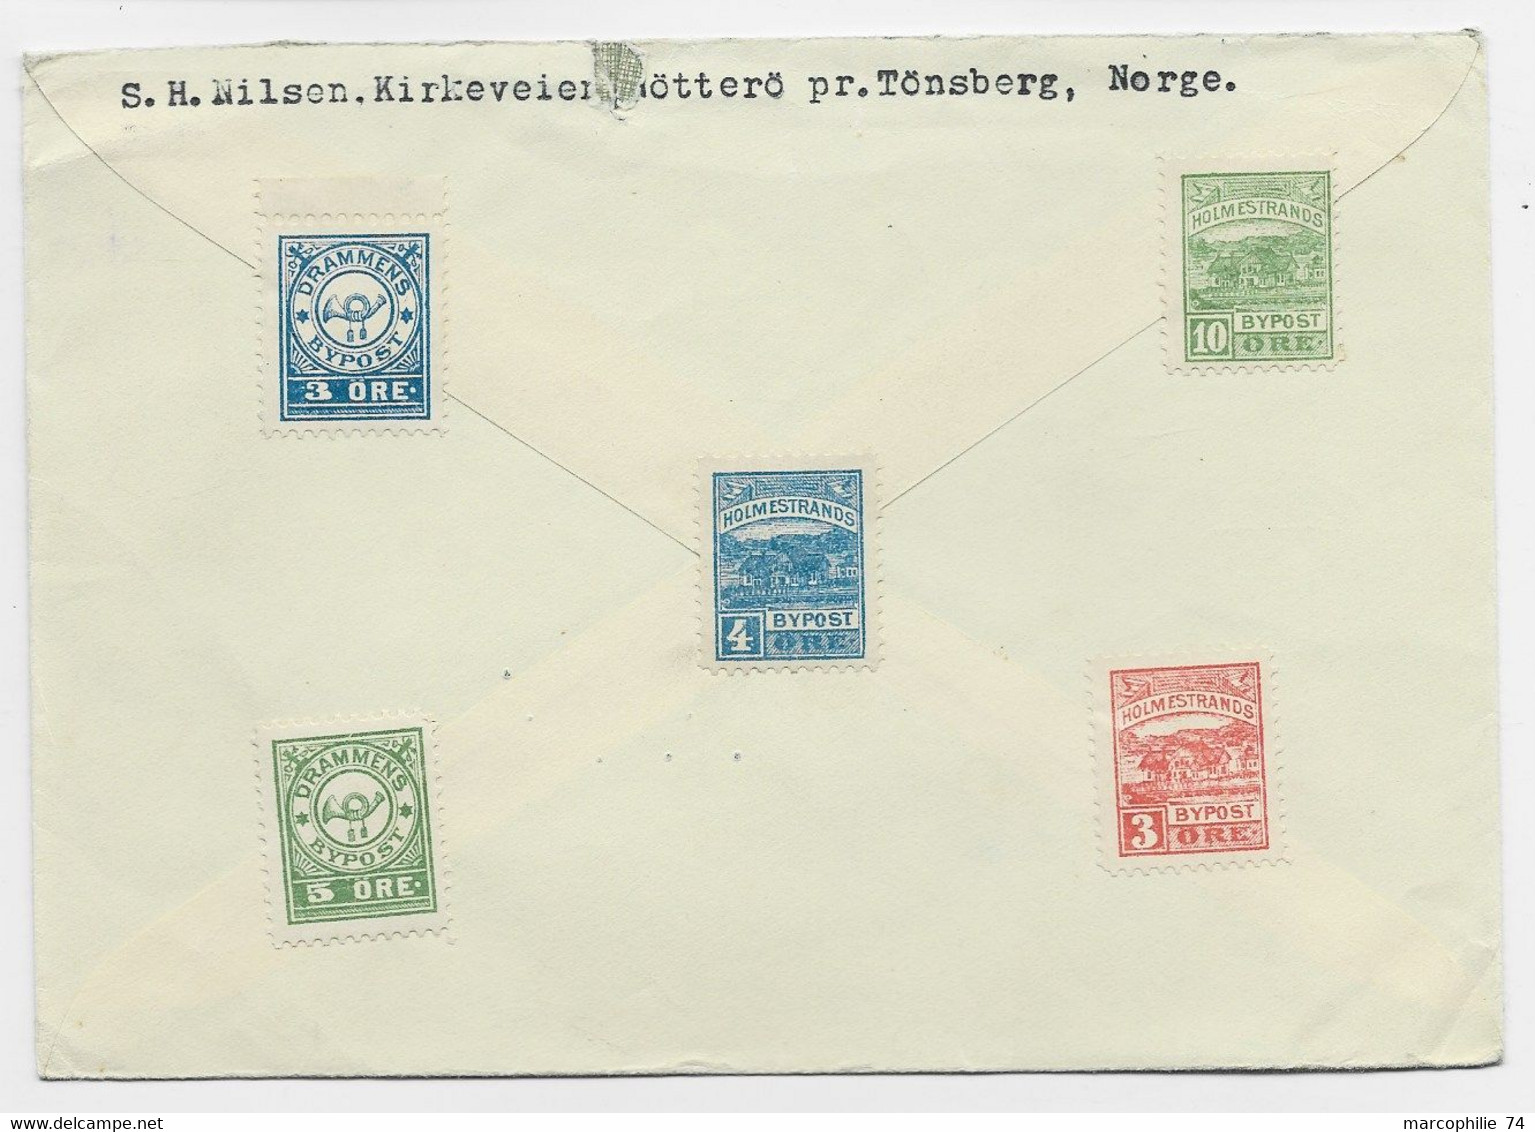 NORGE NORWAY LETTRE COVER TONSBERG 10.1.1955 TO USA - Brieven En Documenten